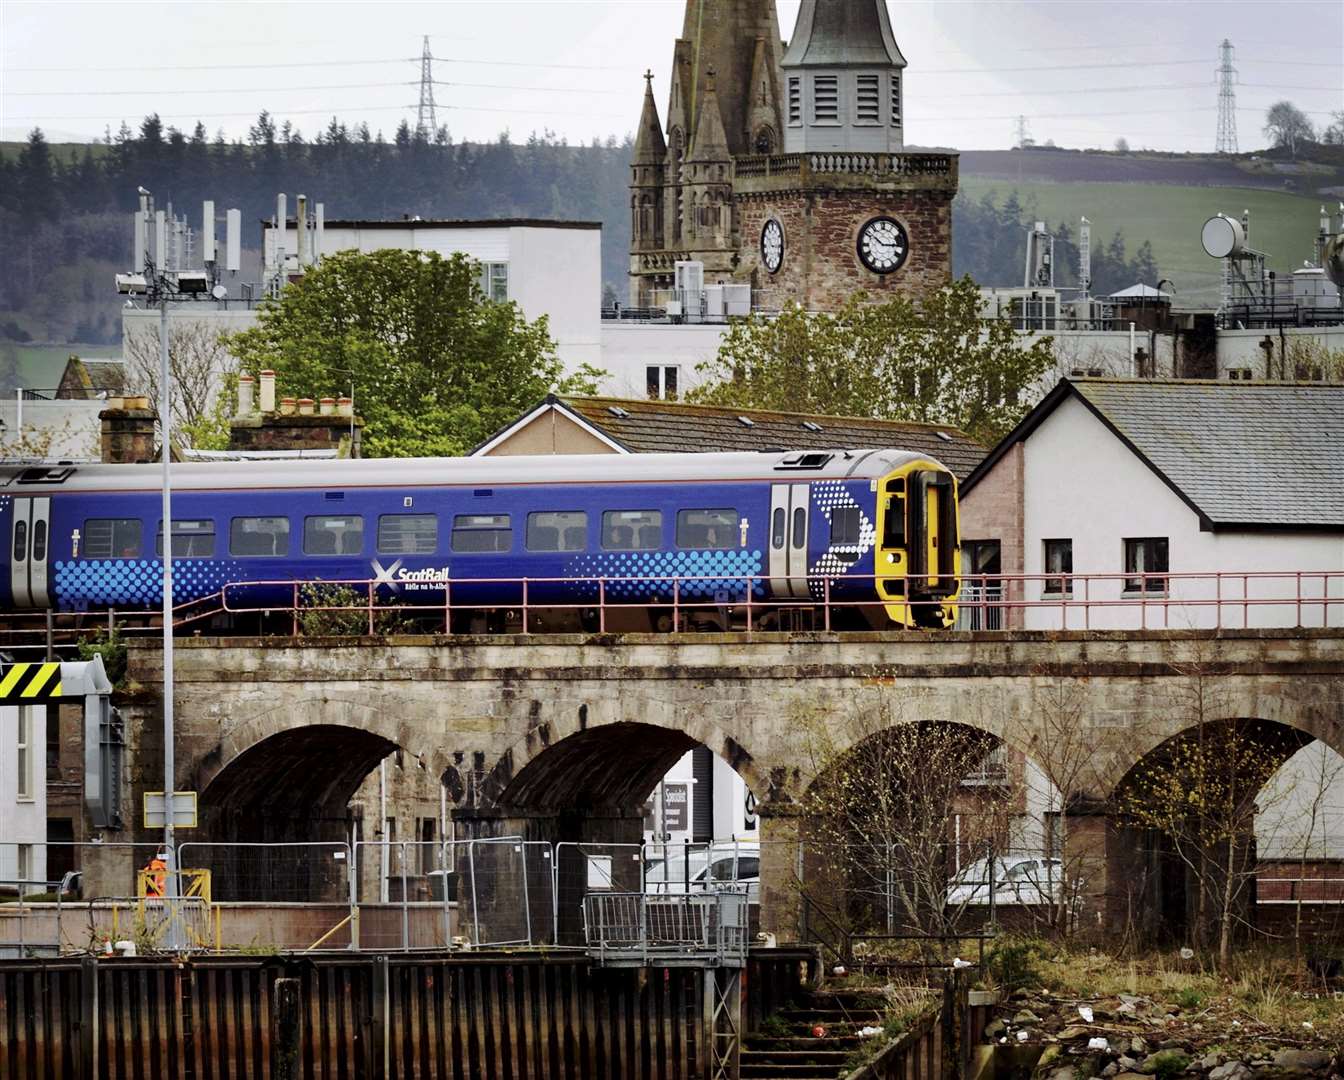 A Scotrail train heads west out of Inverness city centre. Picture: Gary Anthony.